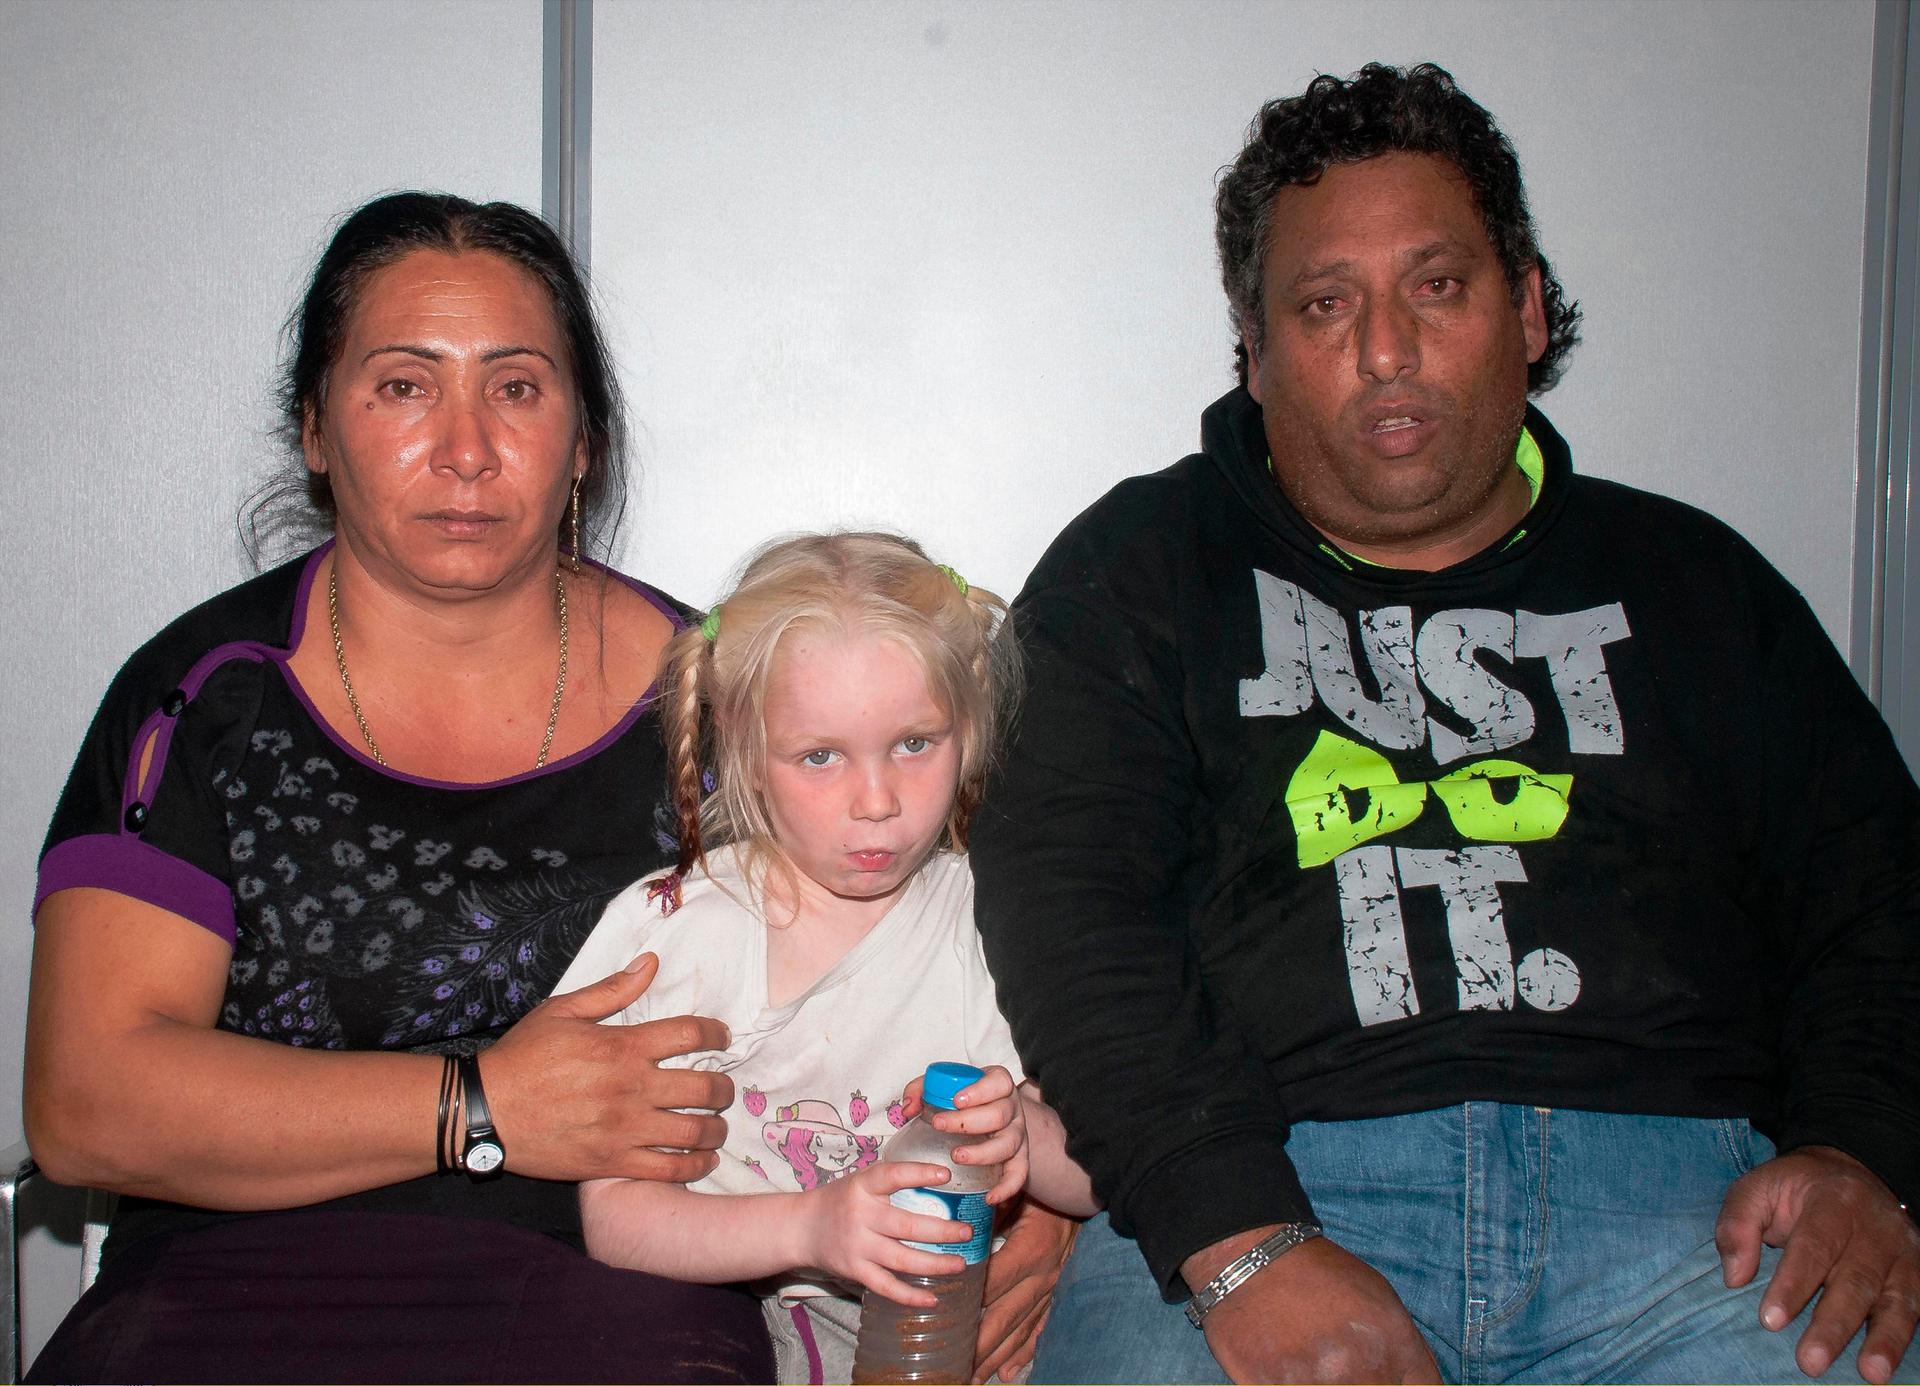 Forty-year-old Roma woman by the name Selini Sali or Eleftheria Dimolpoulou, 39-year-old Roma man by the name Christos Salis (R) and a girl found living with them in central Greece, are seen in a handout photo distributed by the Greek police.